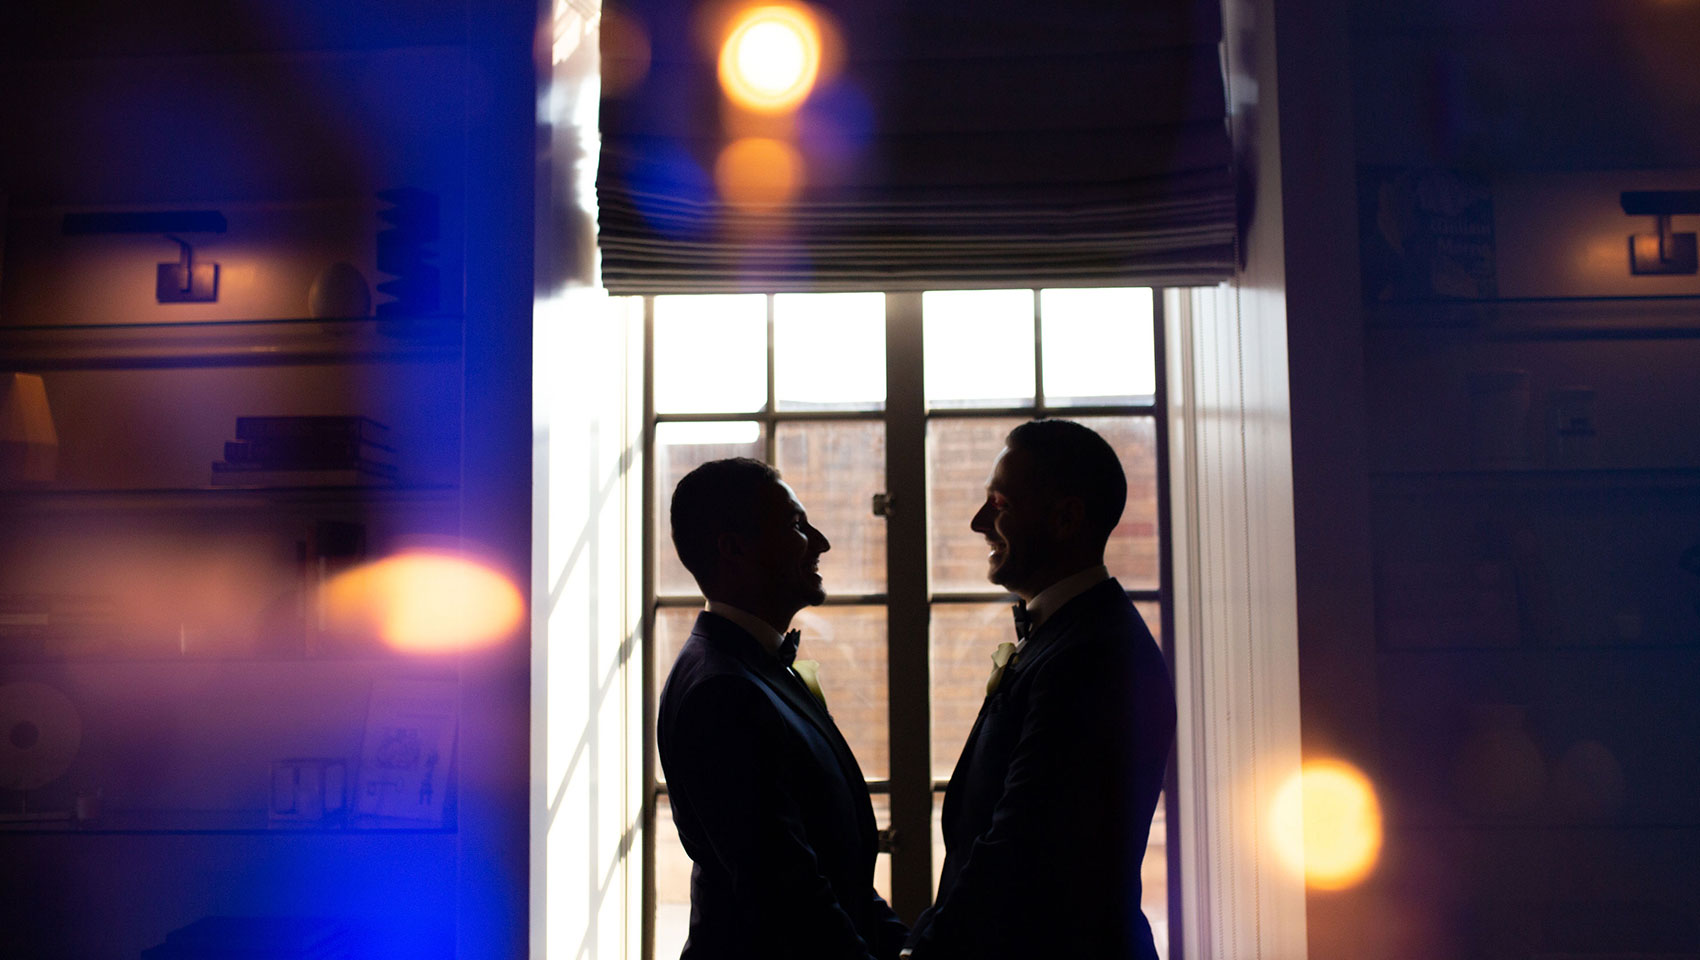 Grooms in silhouette